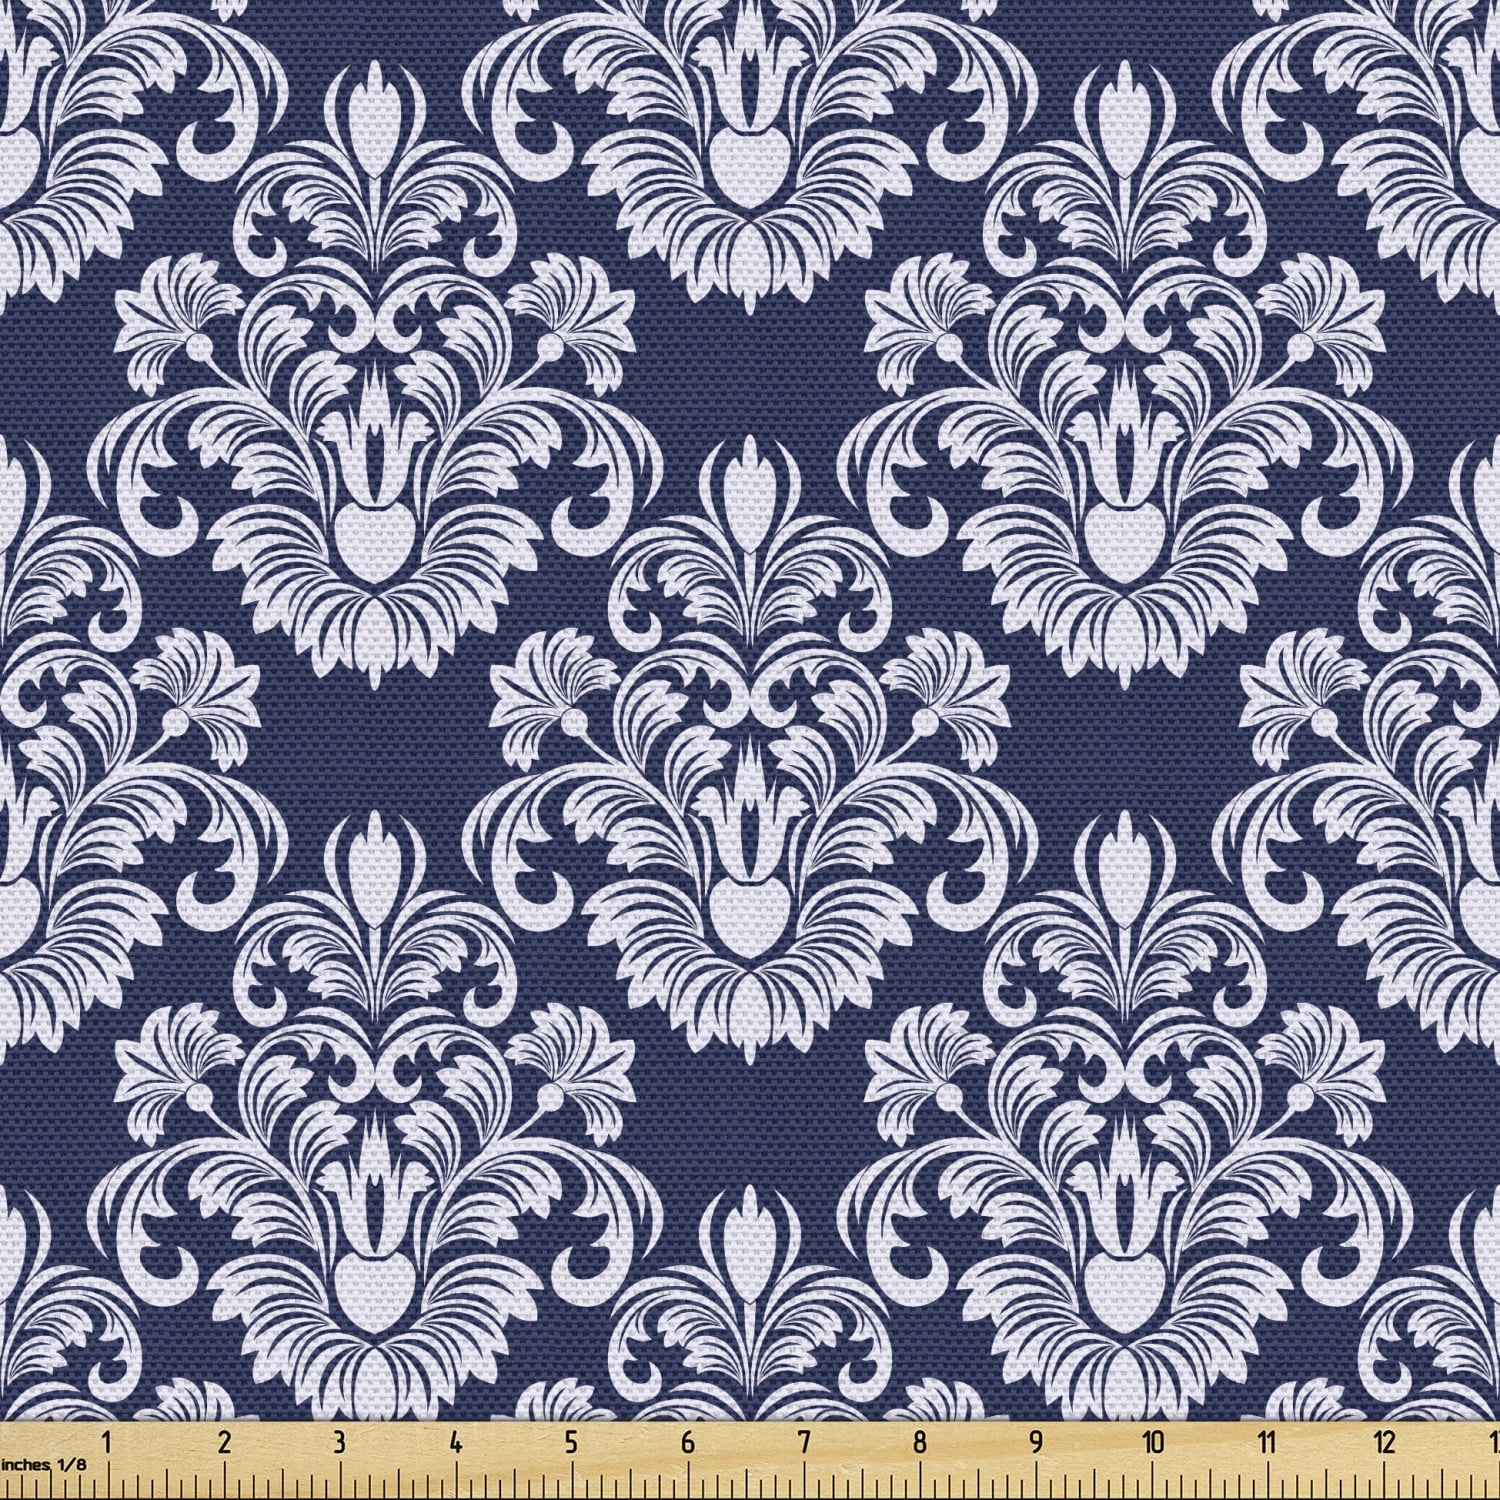 14 YARDS JACQUARD UPHOLSTERY FABRIC NAVY AND WHITE ABSTRACT DESIGN 